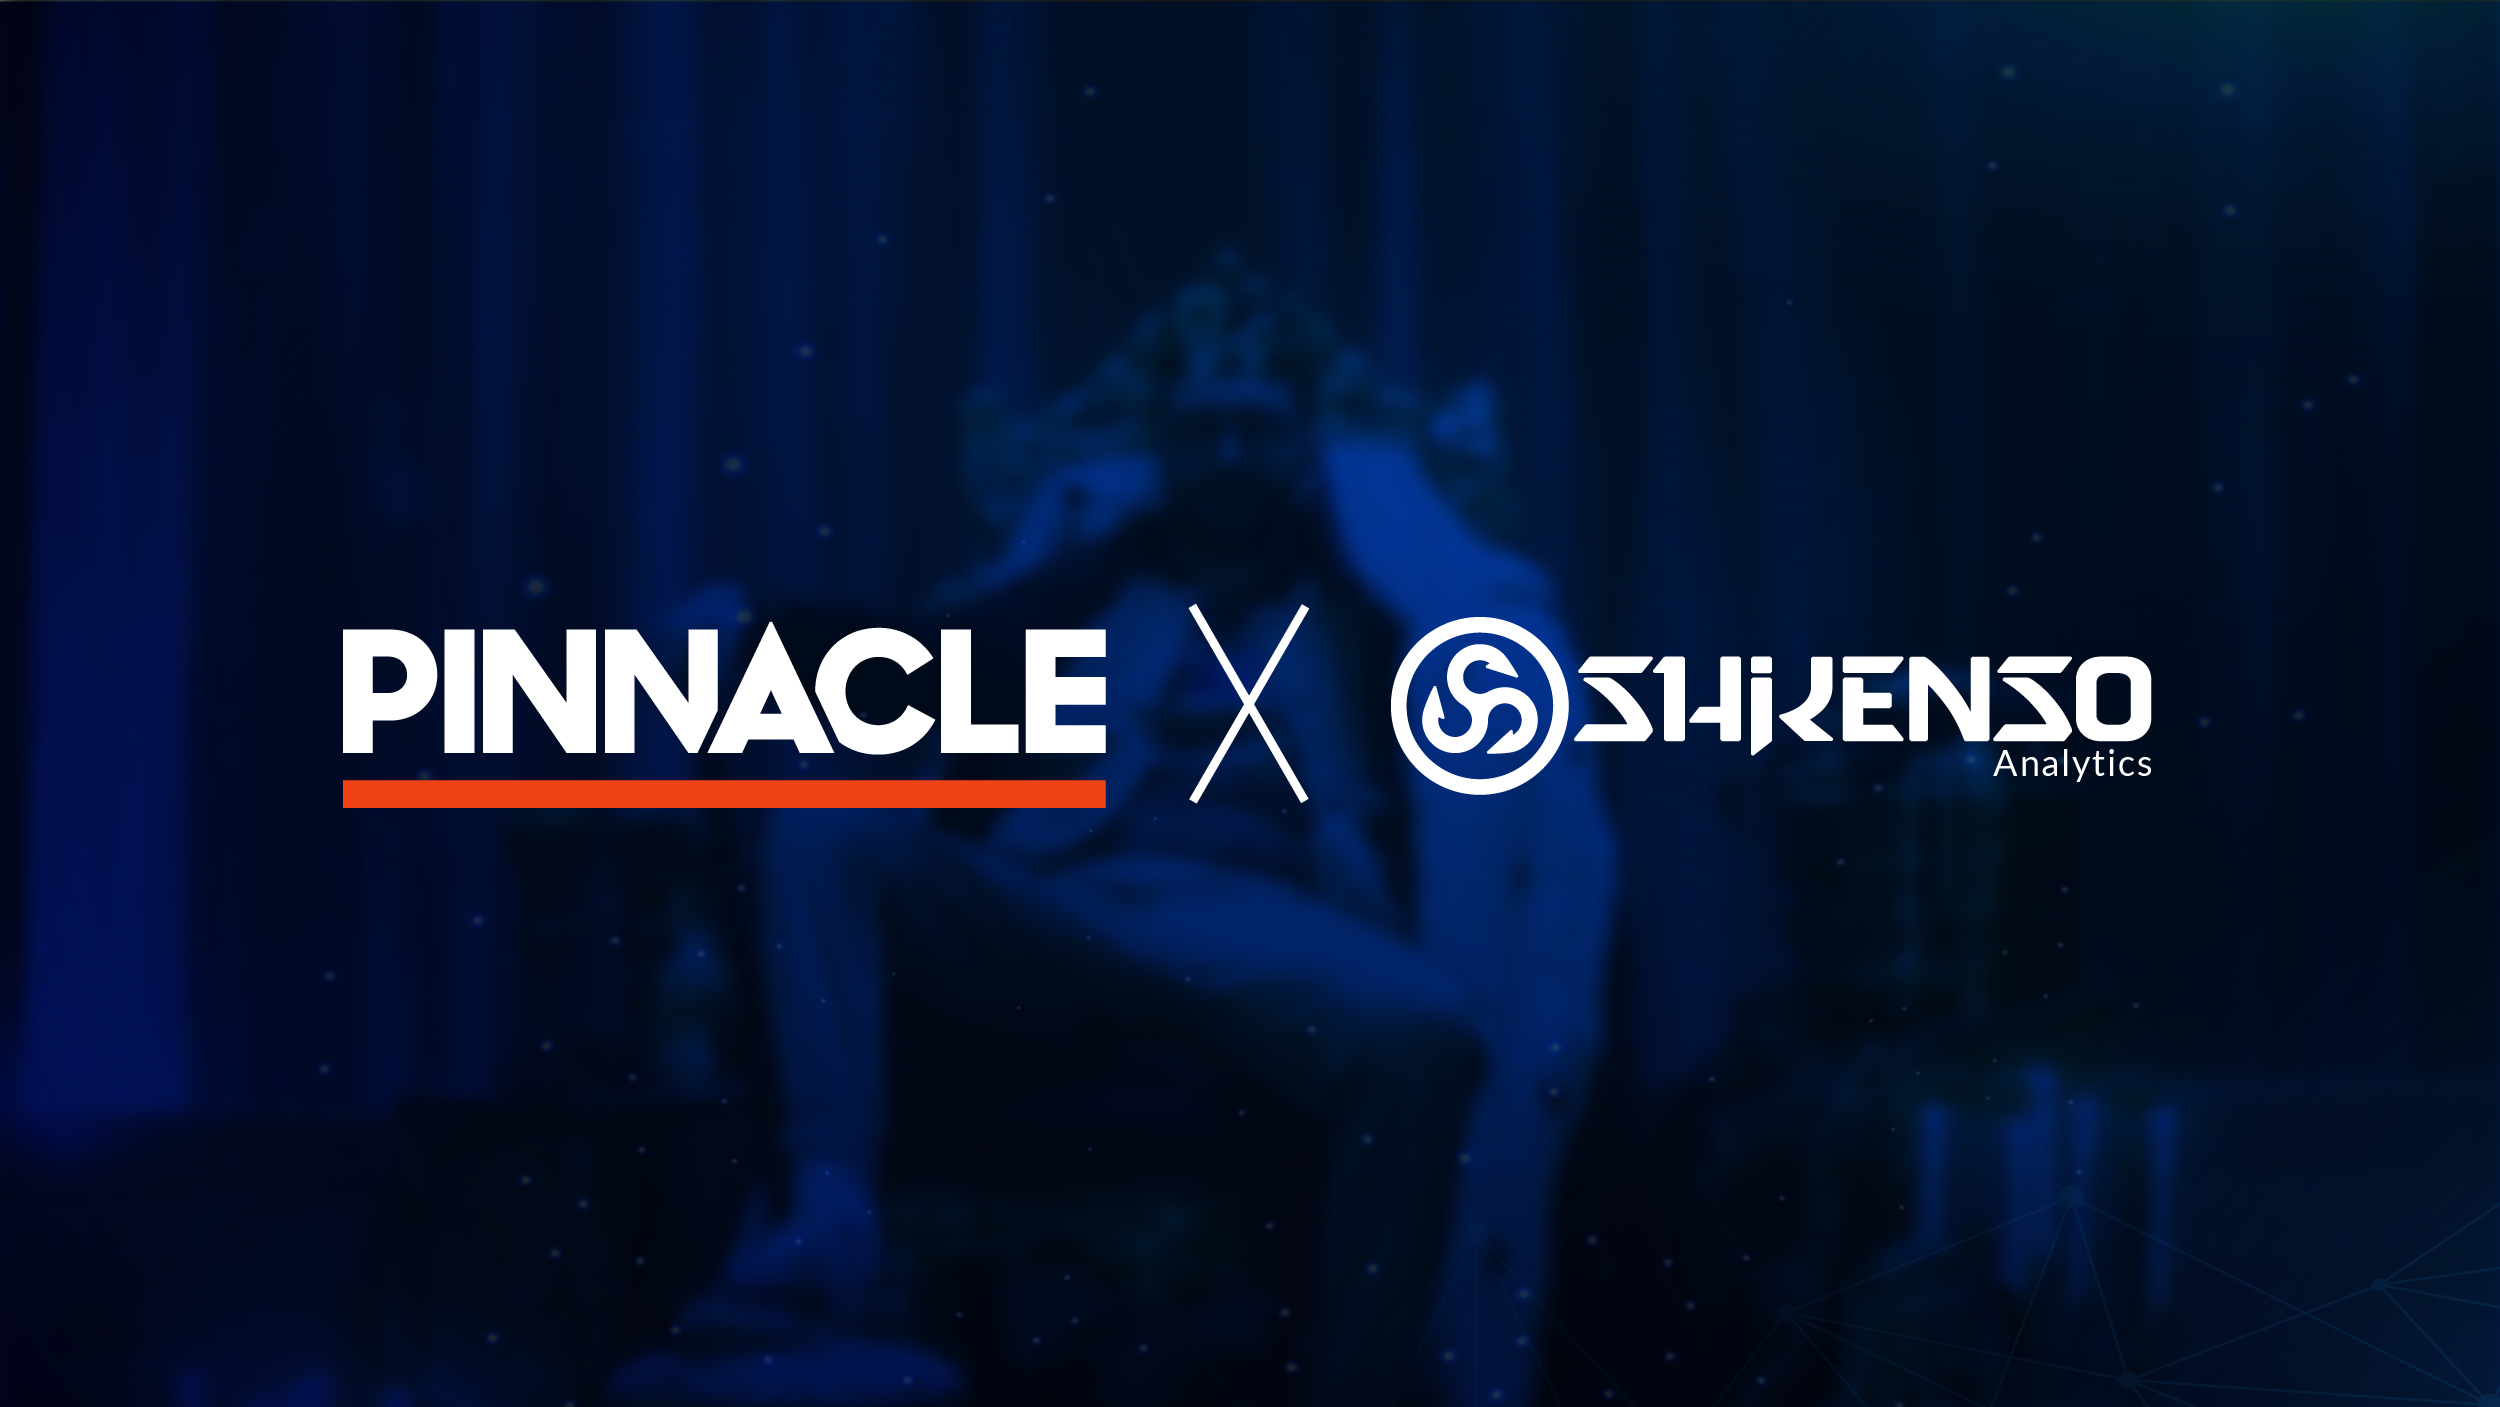 Pinnacle teams up with Shikenso Analytics for partnership performance measurement